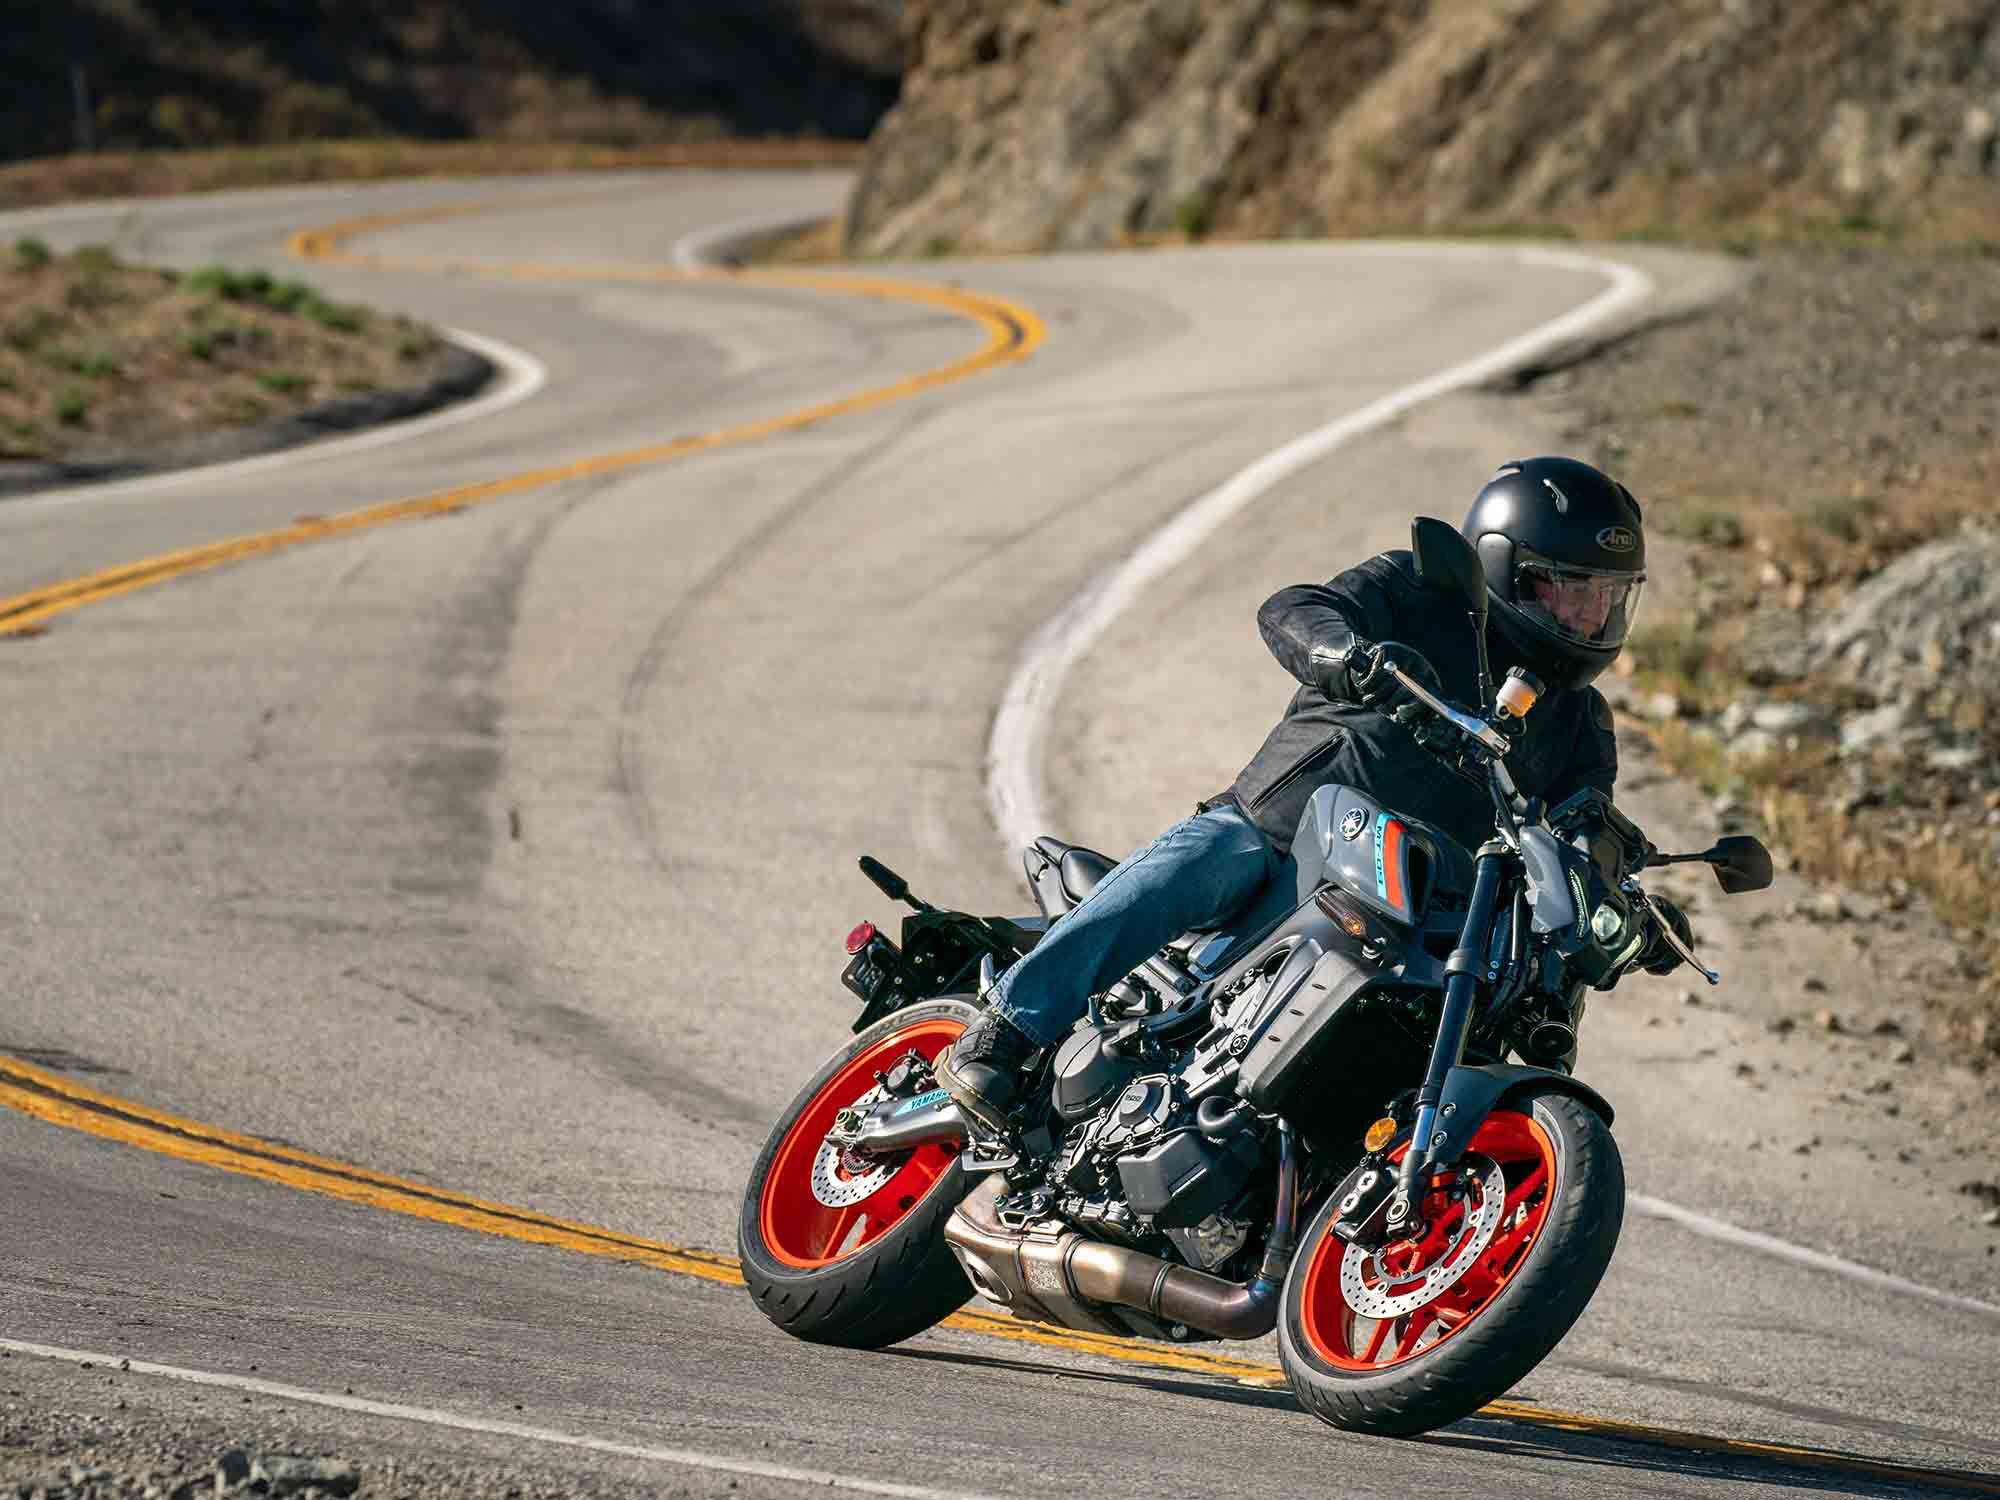 Midcorner bumps don’t upset the MT-09′s well-balanced suspension and chassis.